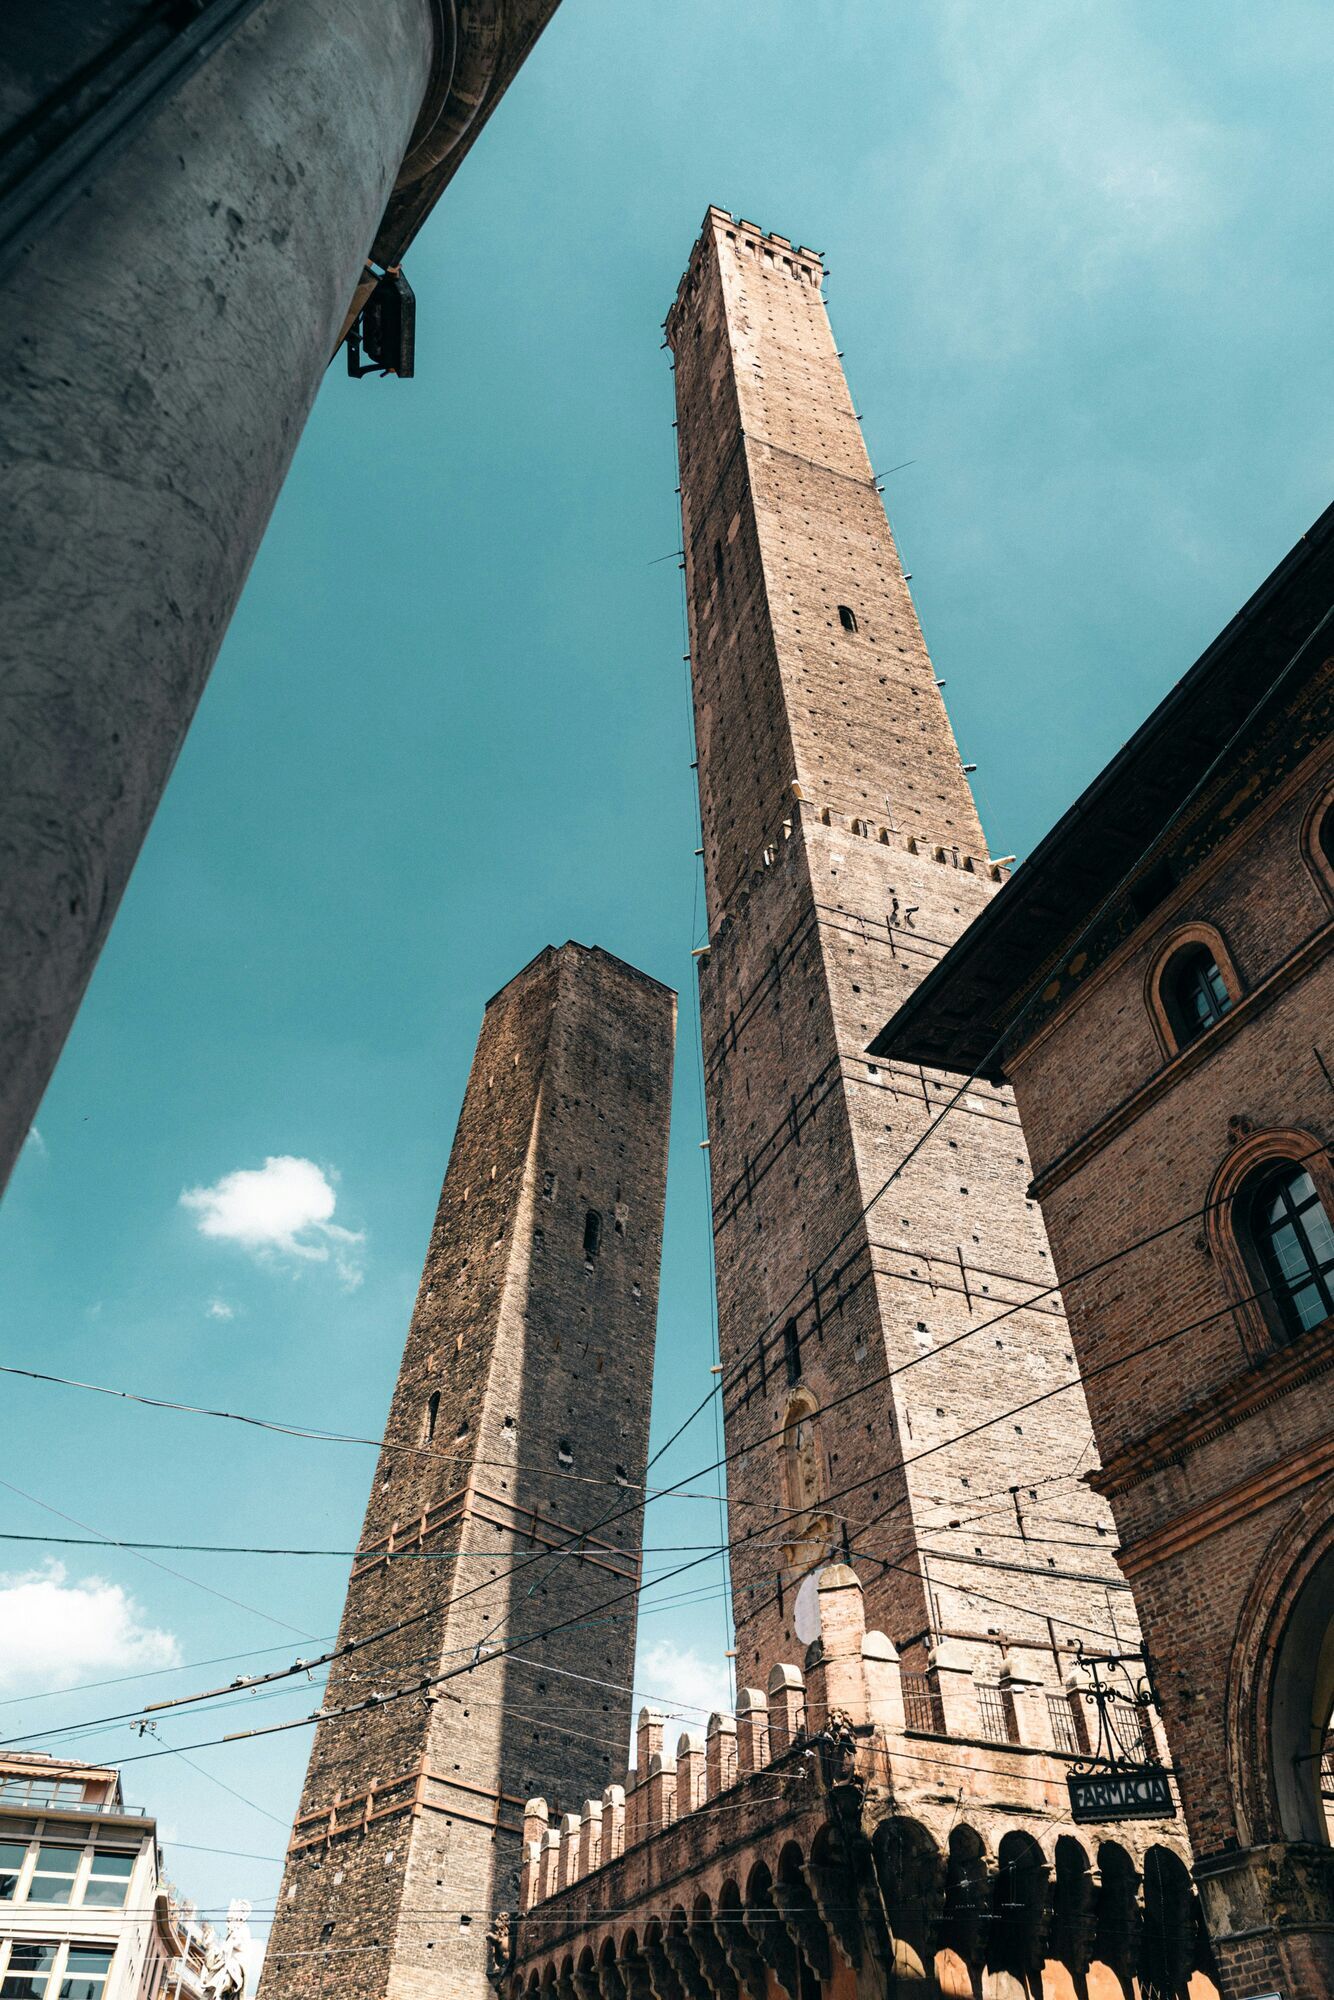 The Italian landmark, which leans more than the Leaning Tower of Pisa, will be additionally reinforced due to the risk of collapse